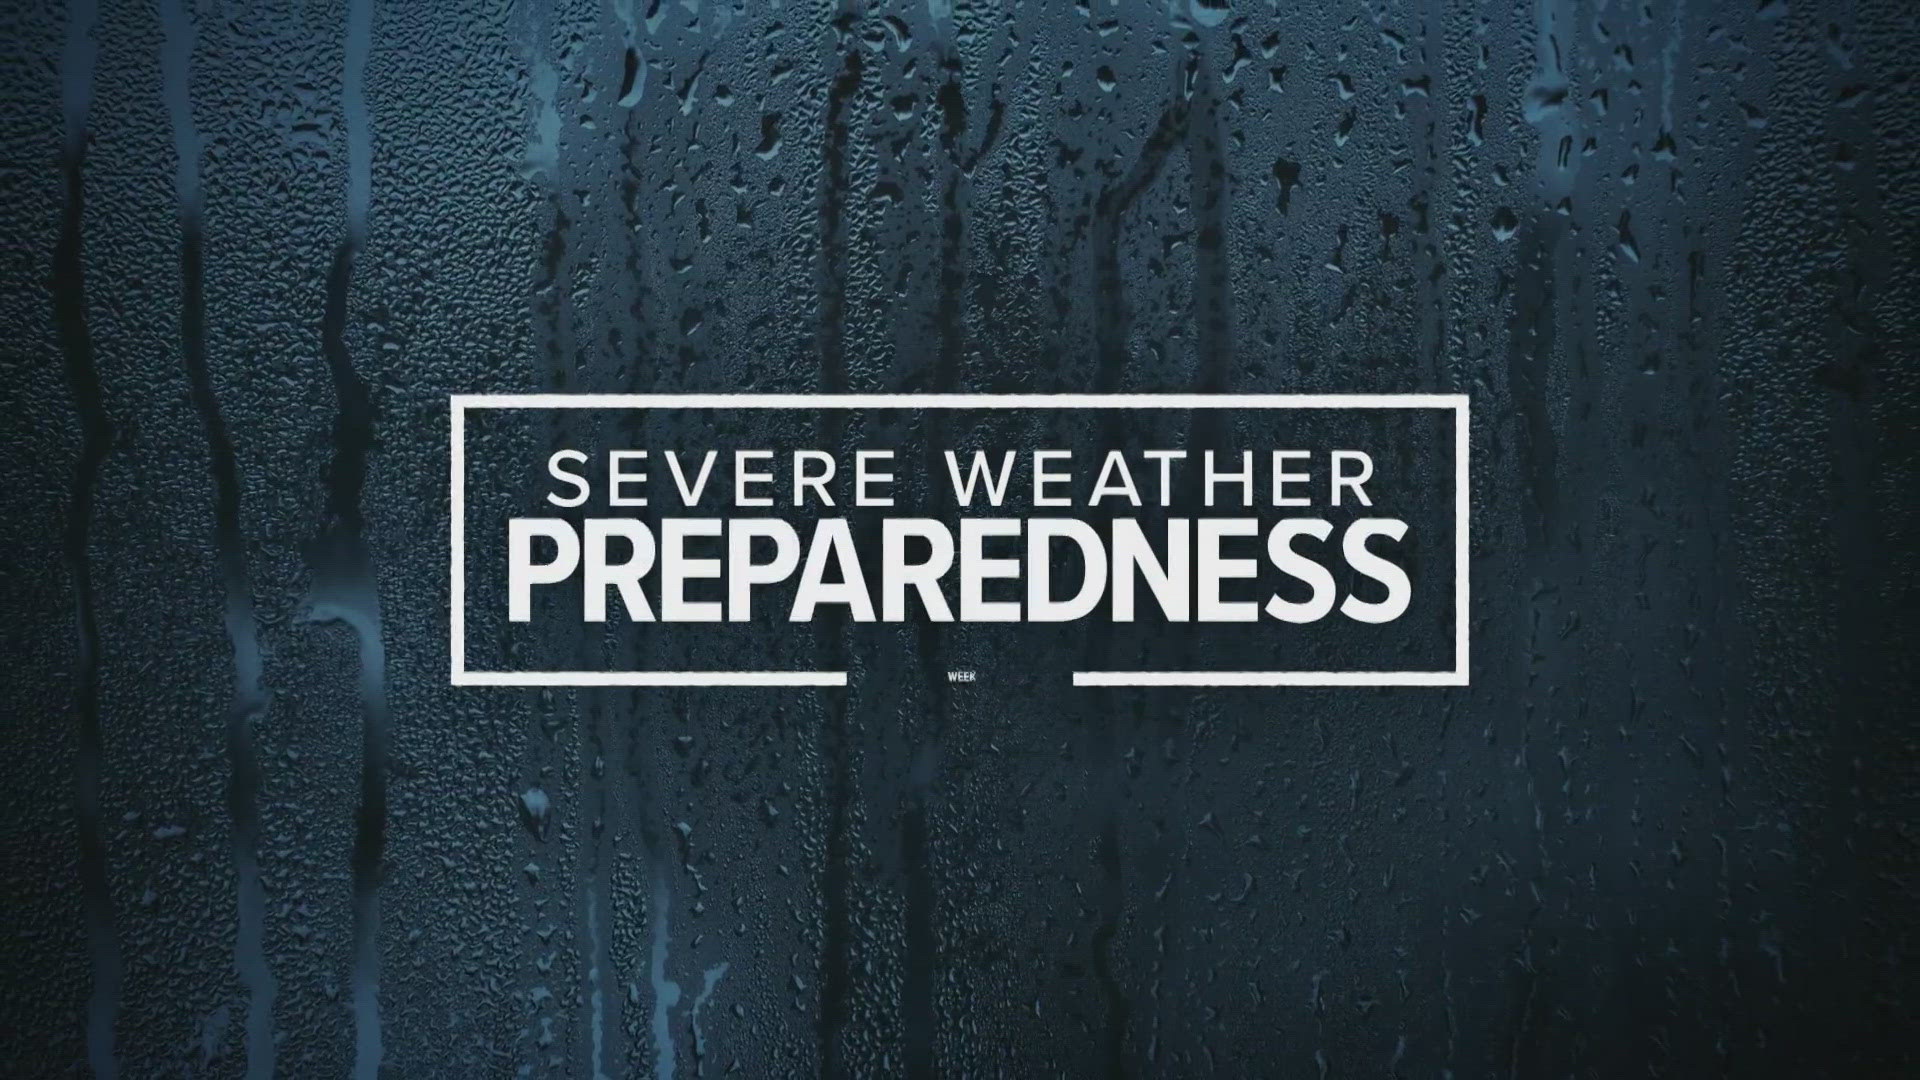 Chief Meteorologist Jordan Frazier starts off severe weather preparedness week with a look at the costliest weather phenomena, hail.